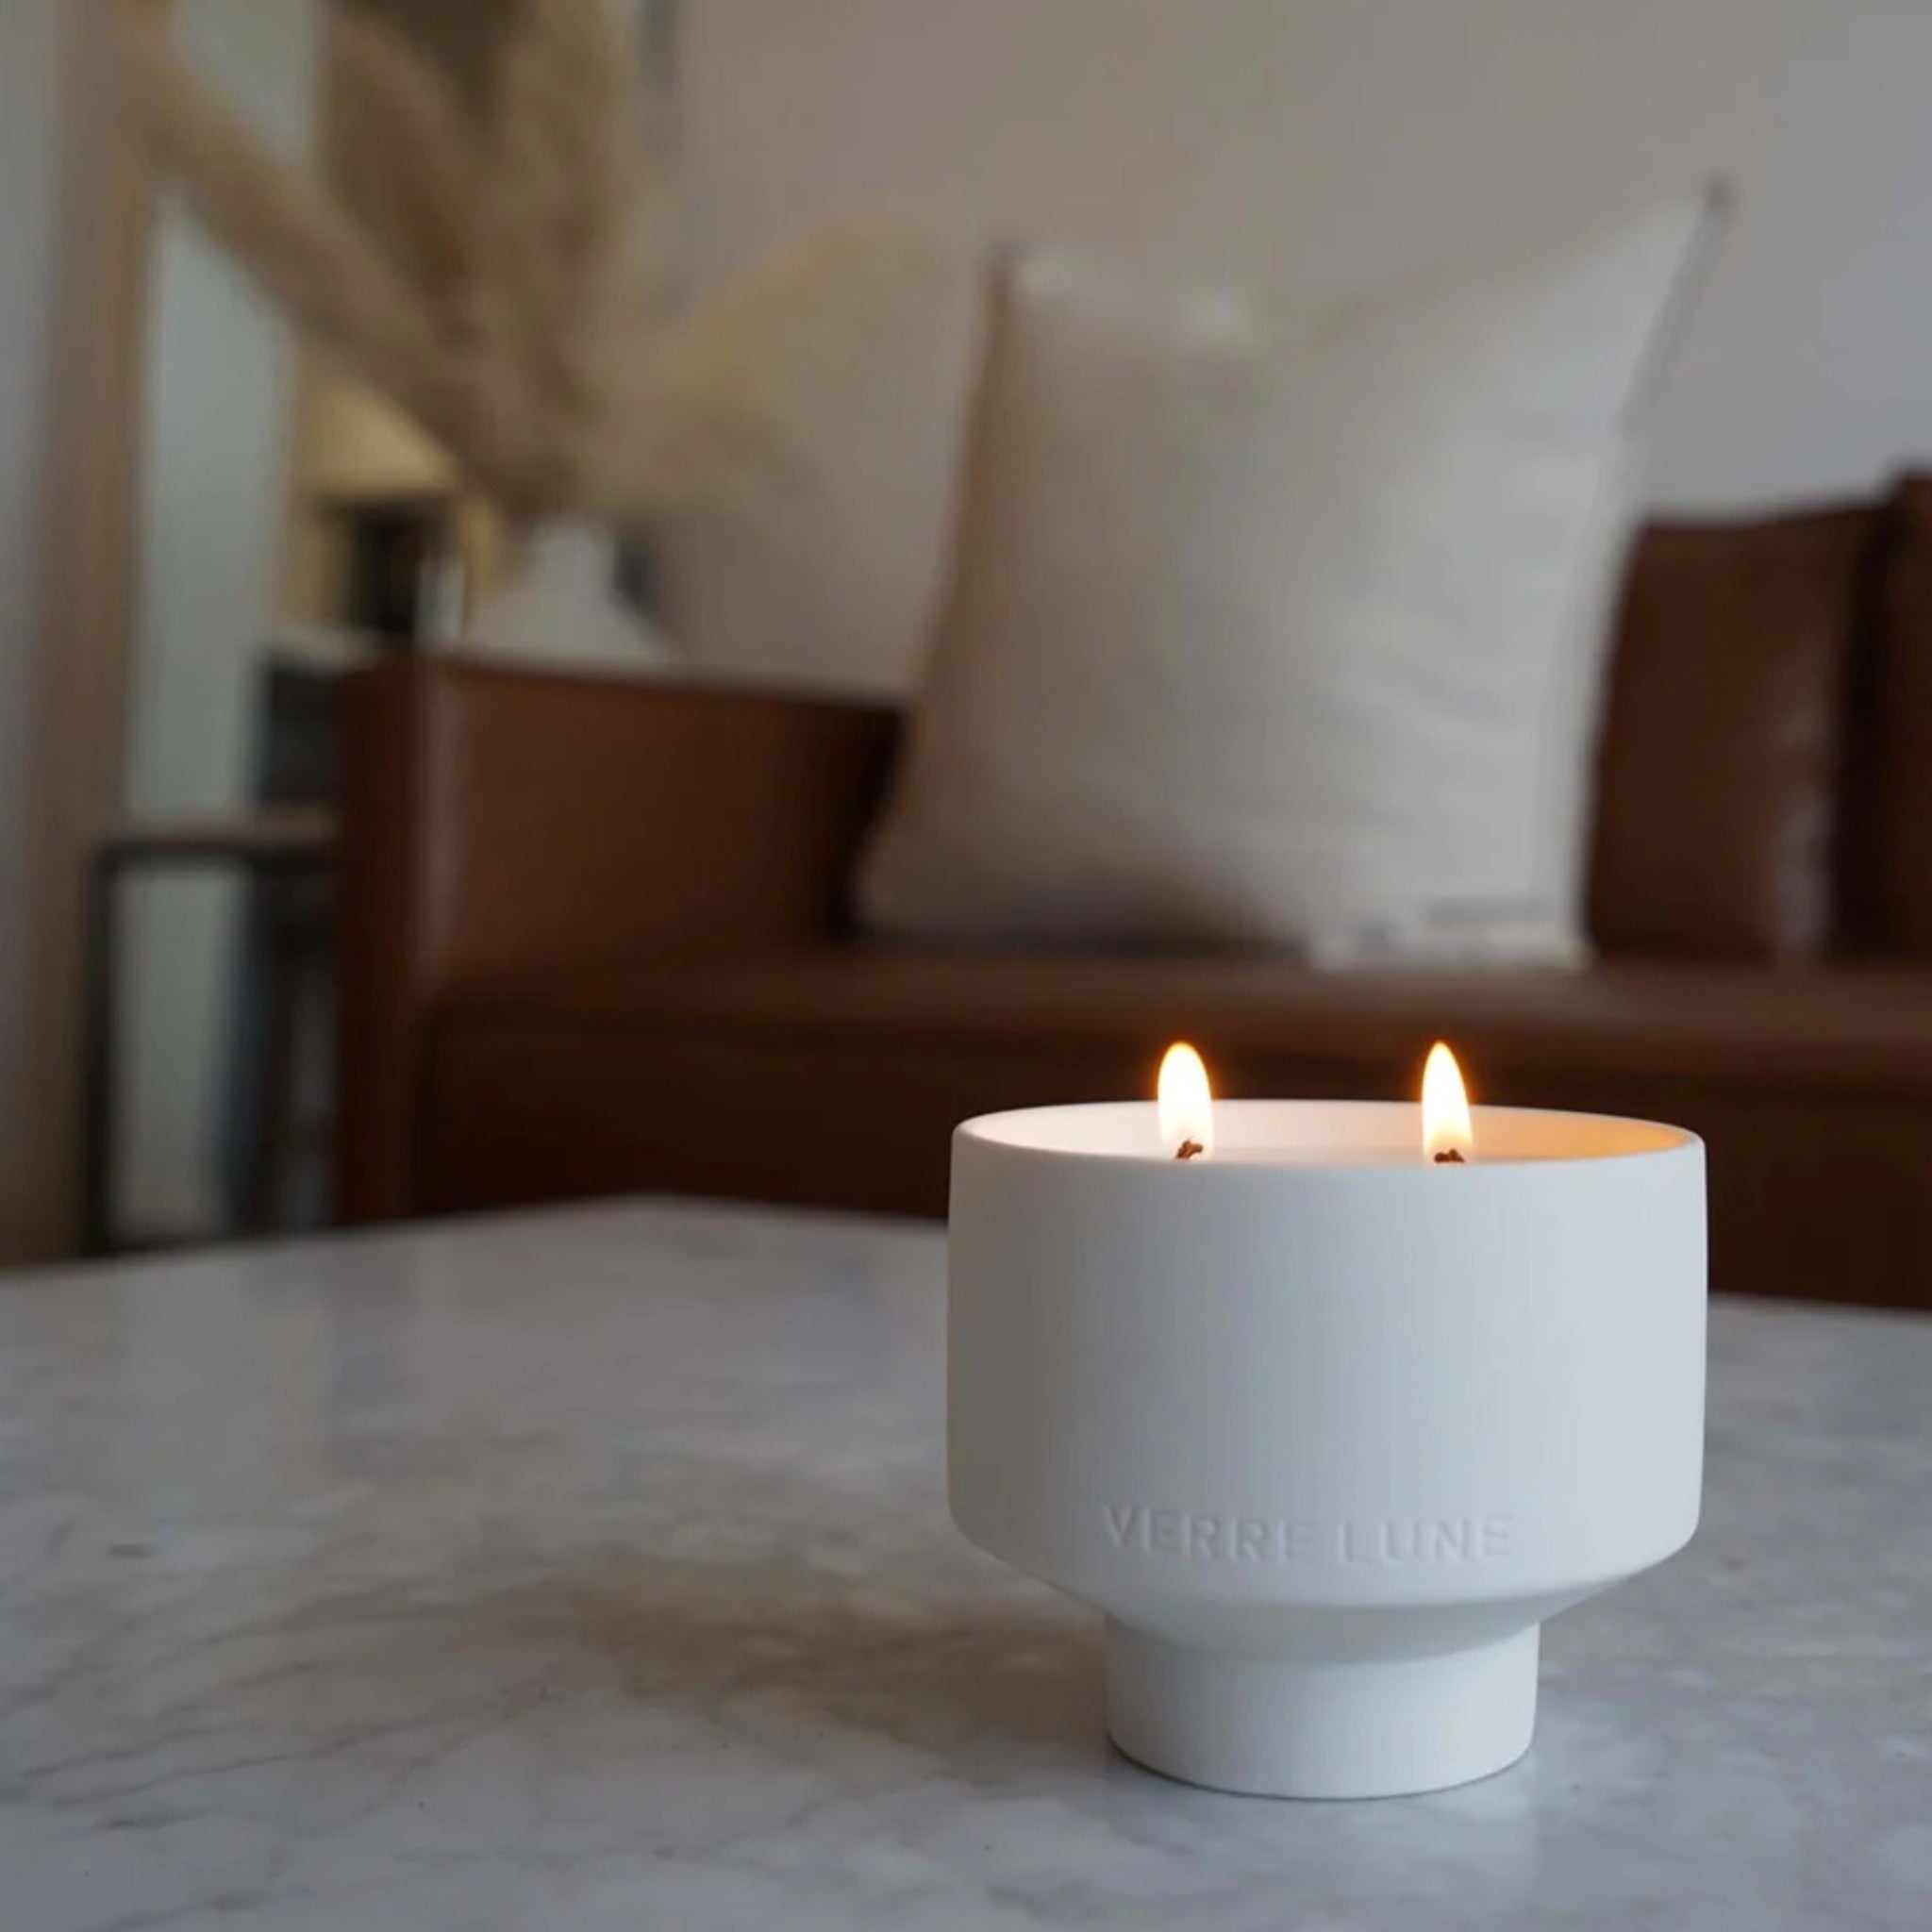 verre lune oasis candle lit in a living room setting